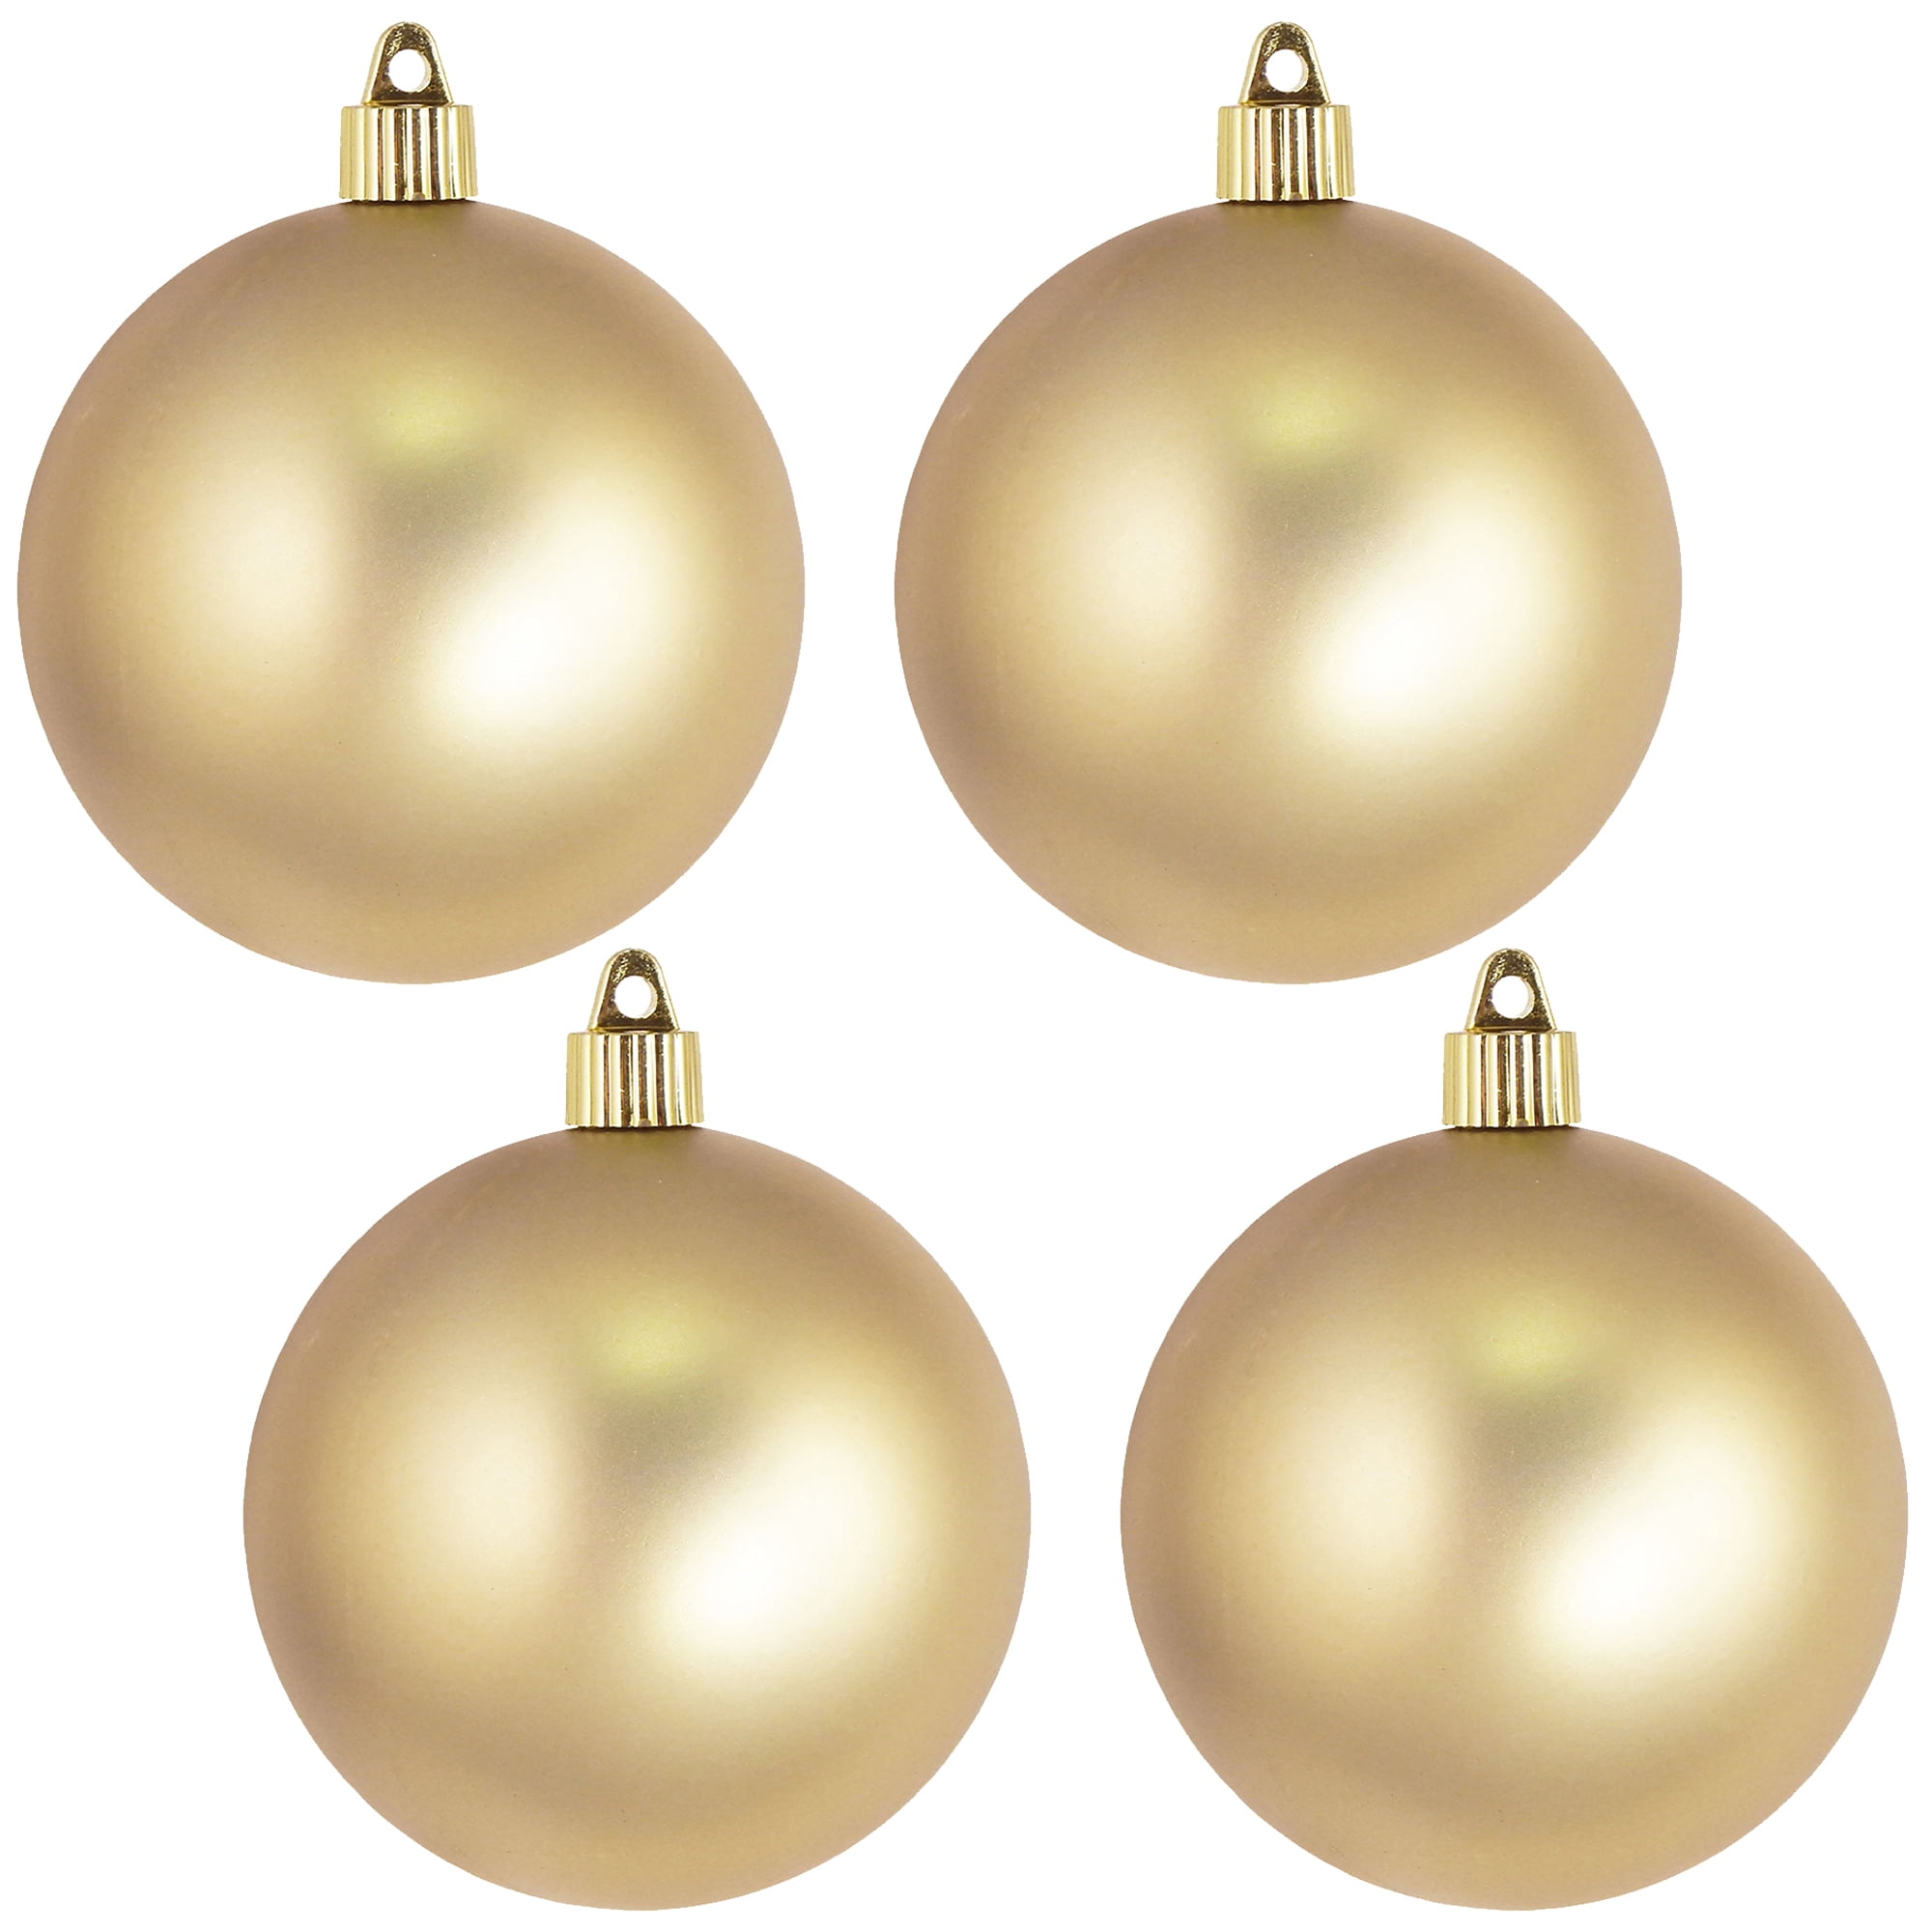 Christmas decorations flat rate postage fee on all baubles Set of 4 handblown glass baubles